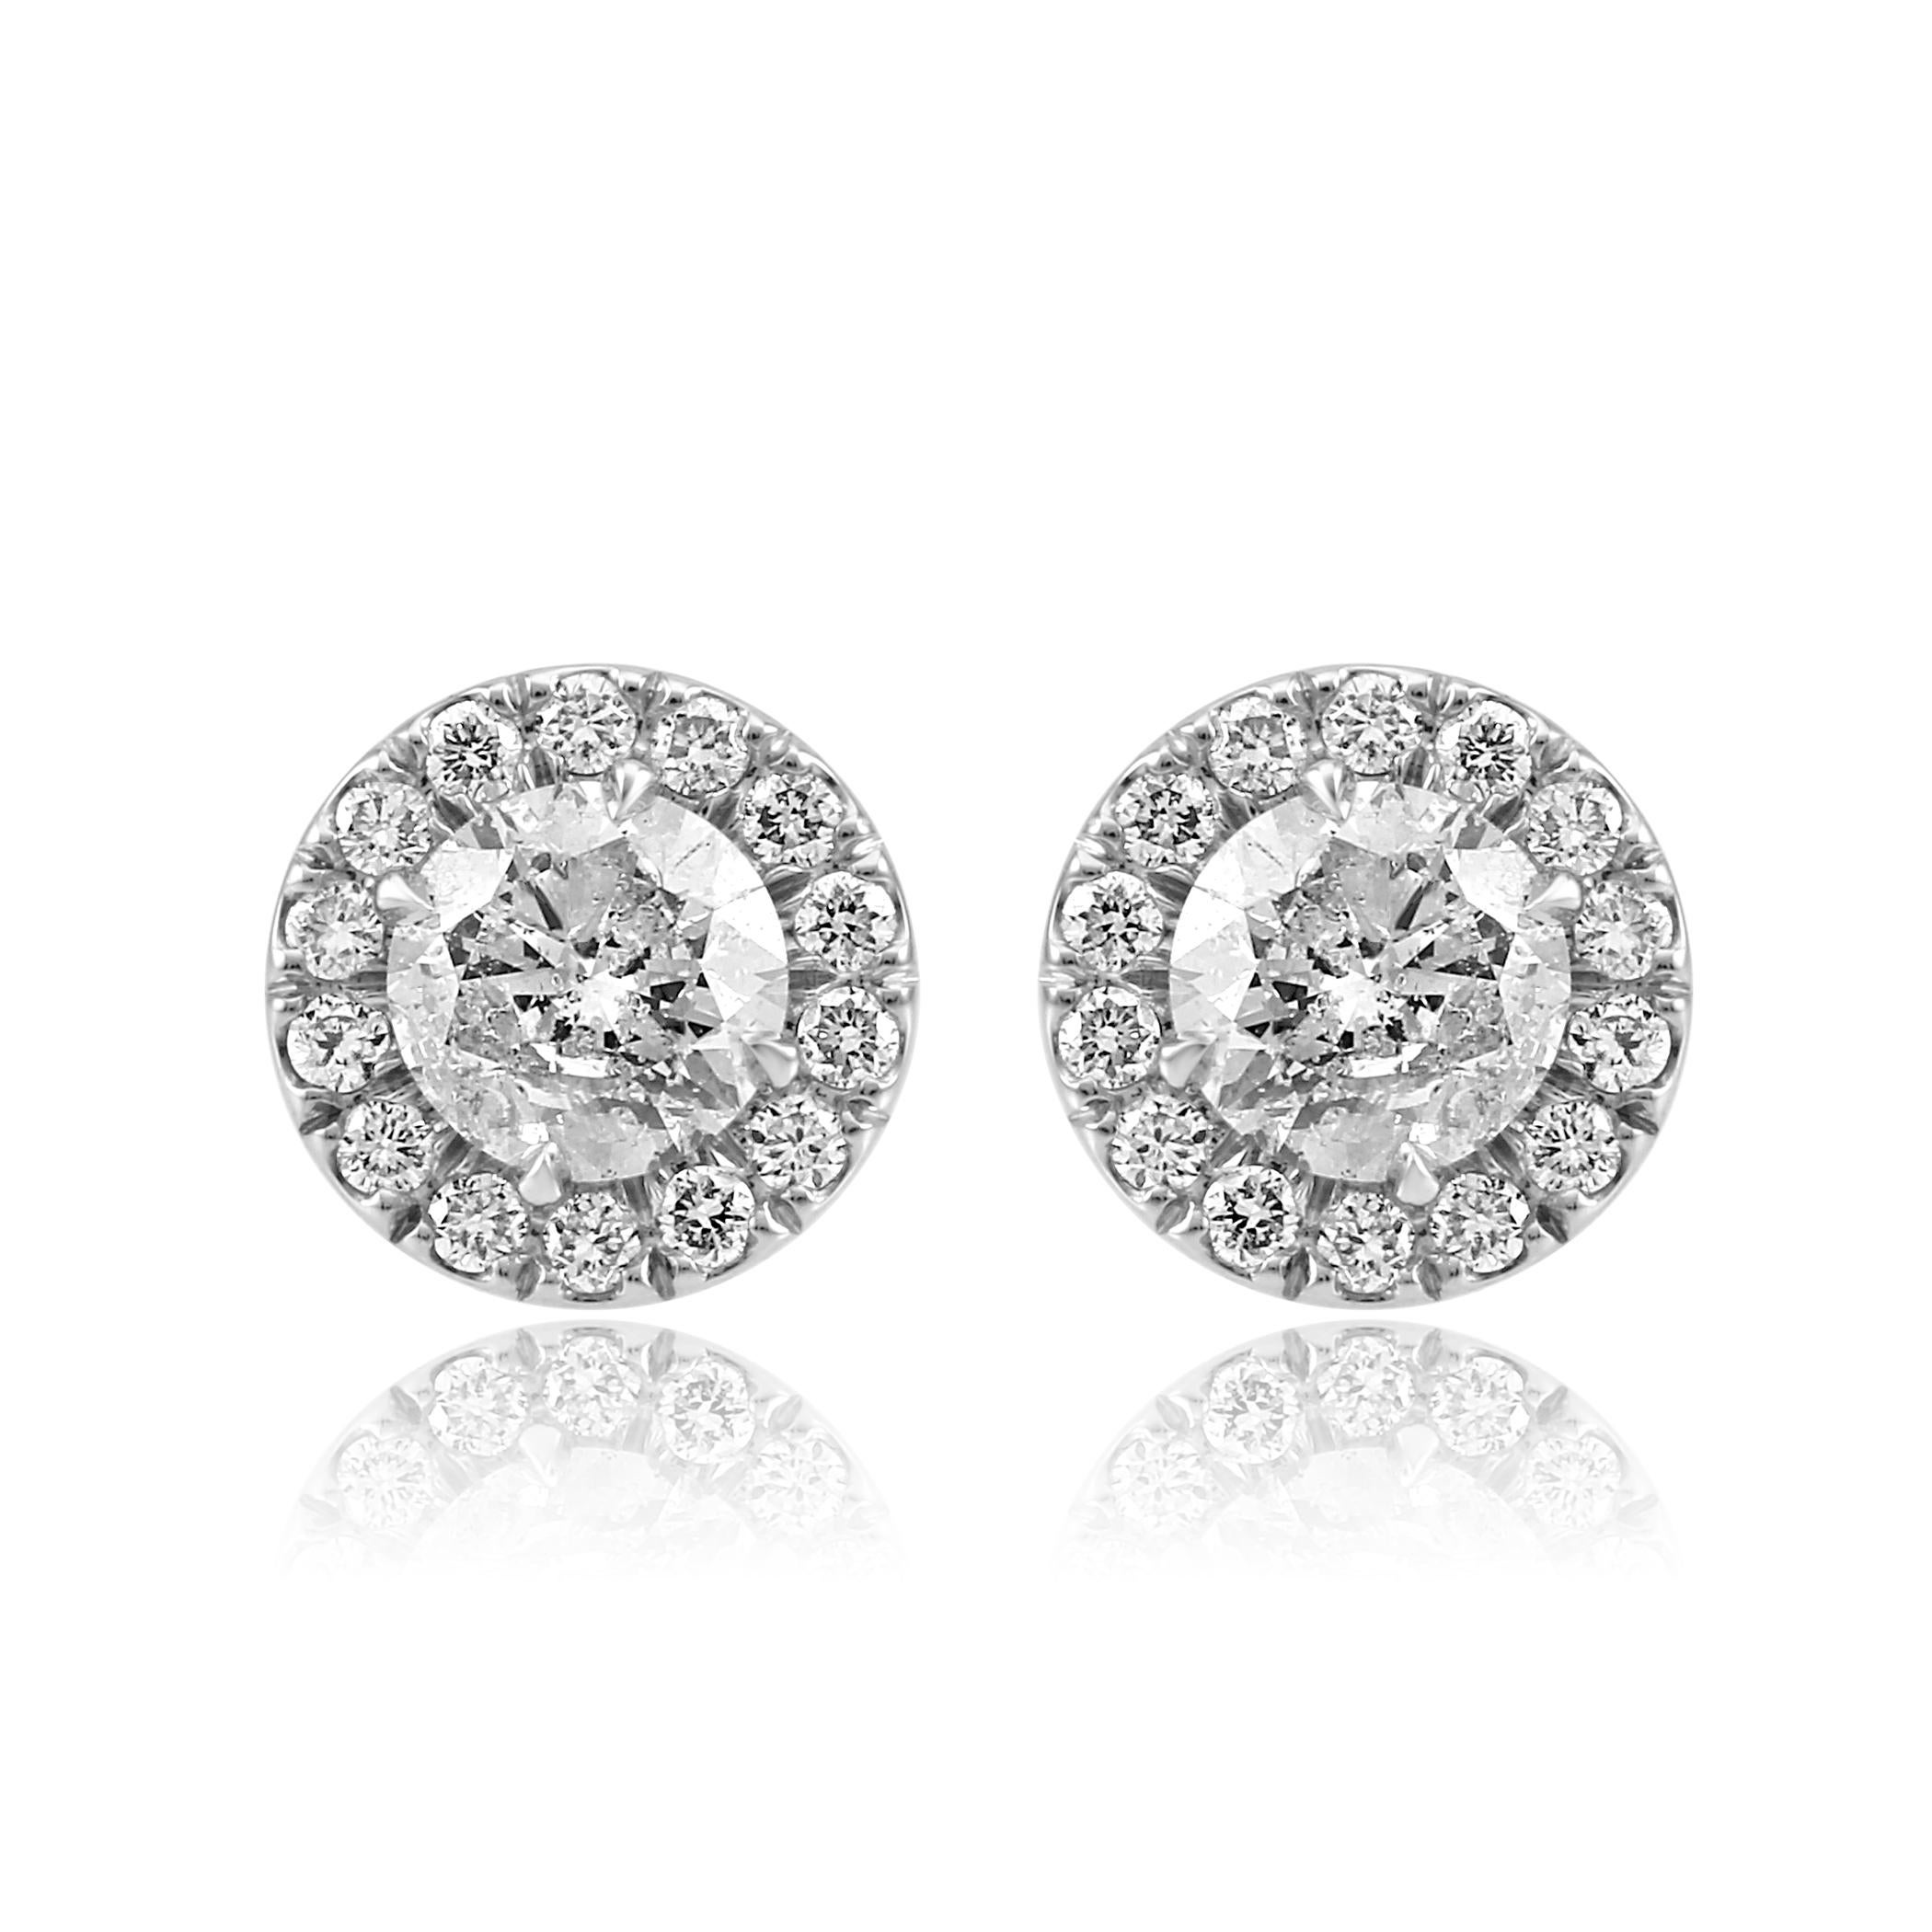 2 White Colorless diamond Round 1.92 Carat I Clarity Encircled in a Single Halo of White Colorless Round Diamonds SI Clarity 0.48 Carat in Gorgeous always in style 14K White Gold Stud Earrings.

2 Center Diamond Weight 1.92Carat
Total Diamond Weight